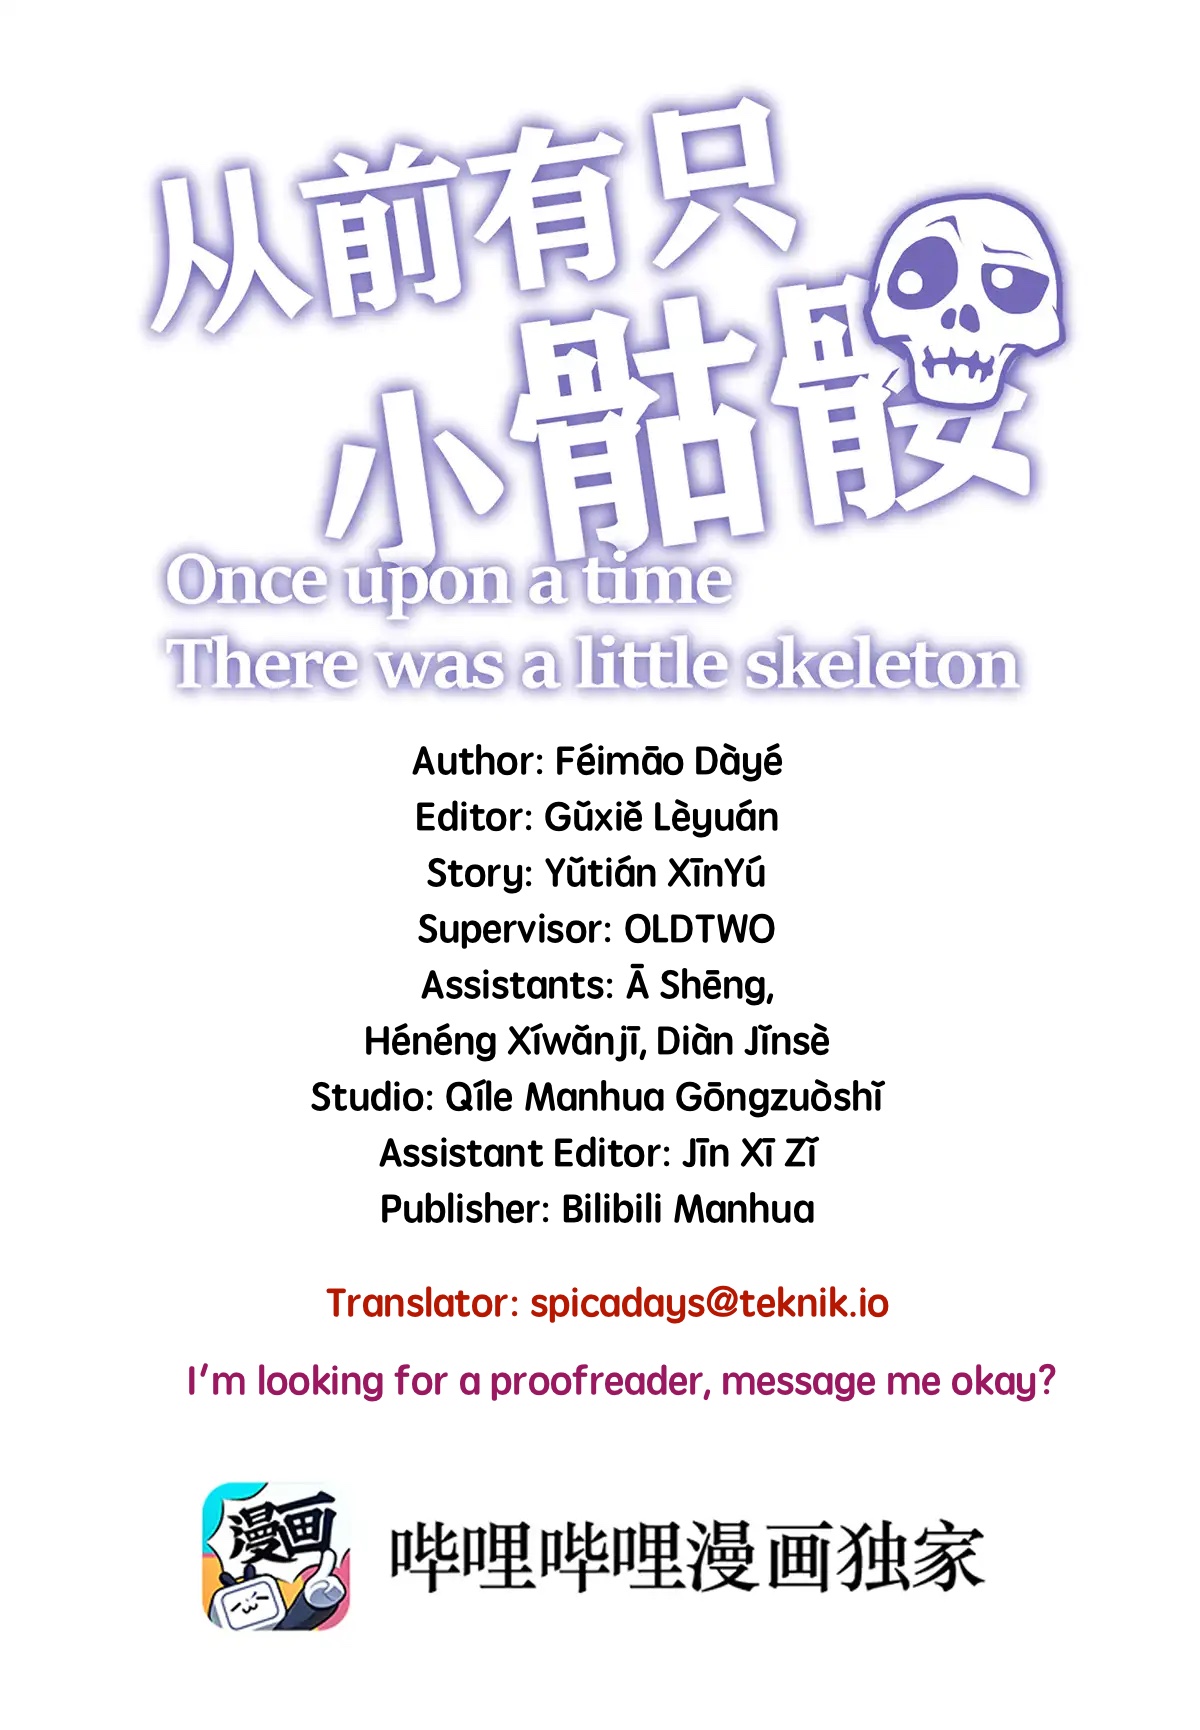 Little Skeleton Ch. 19 Your interests are very weird.